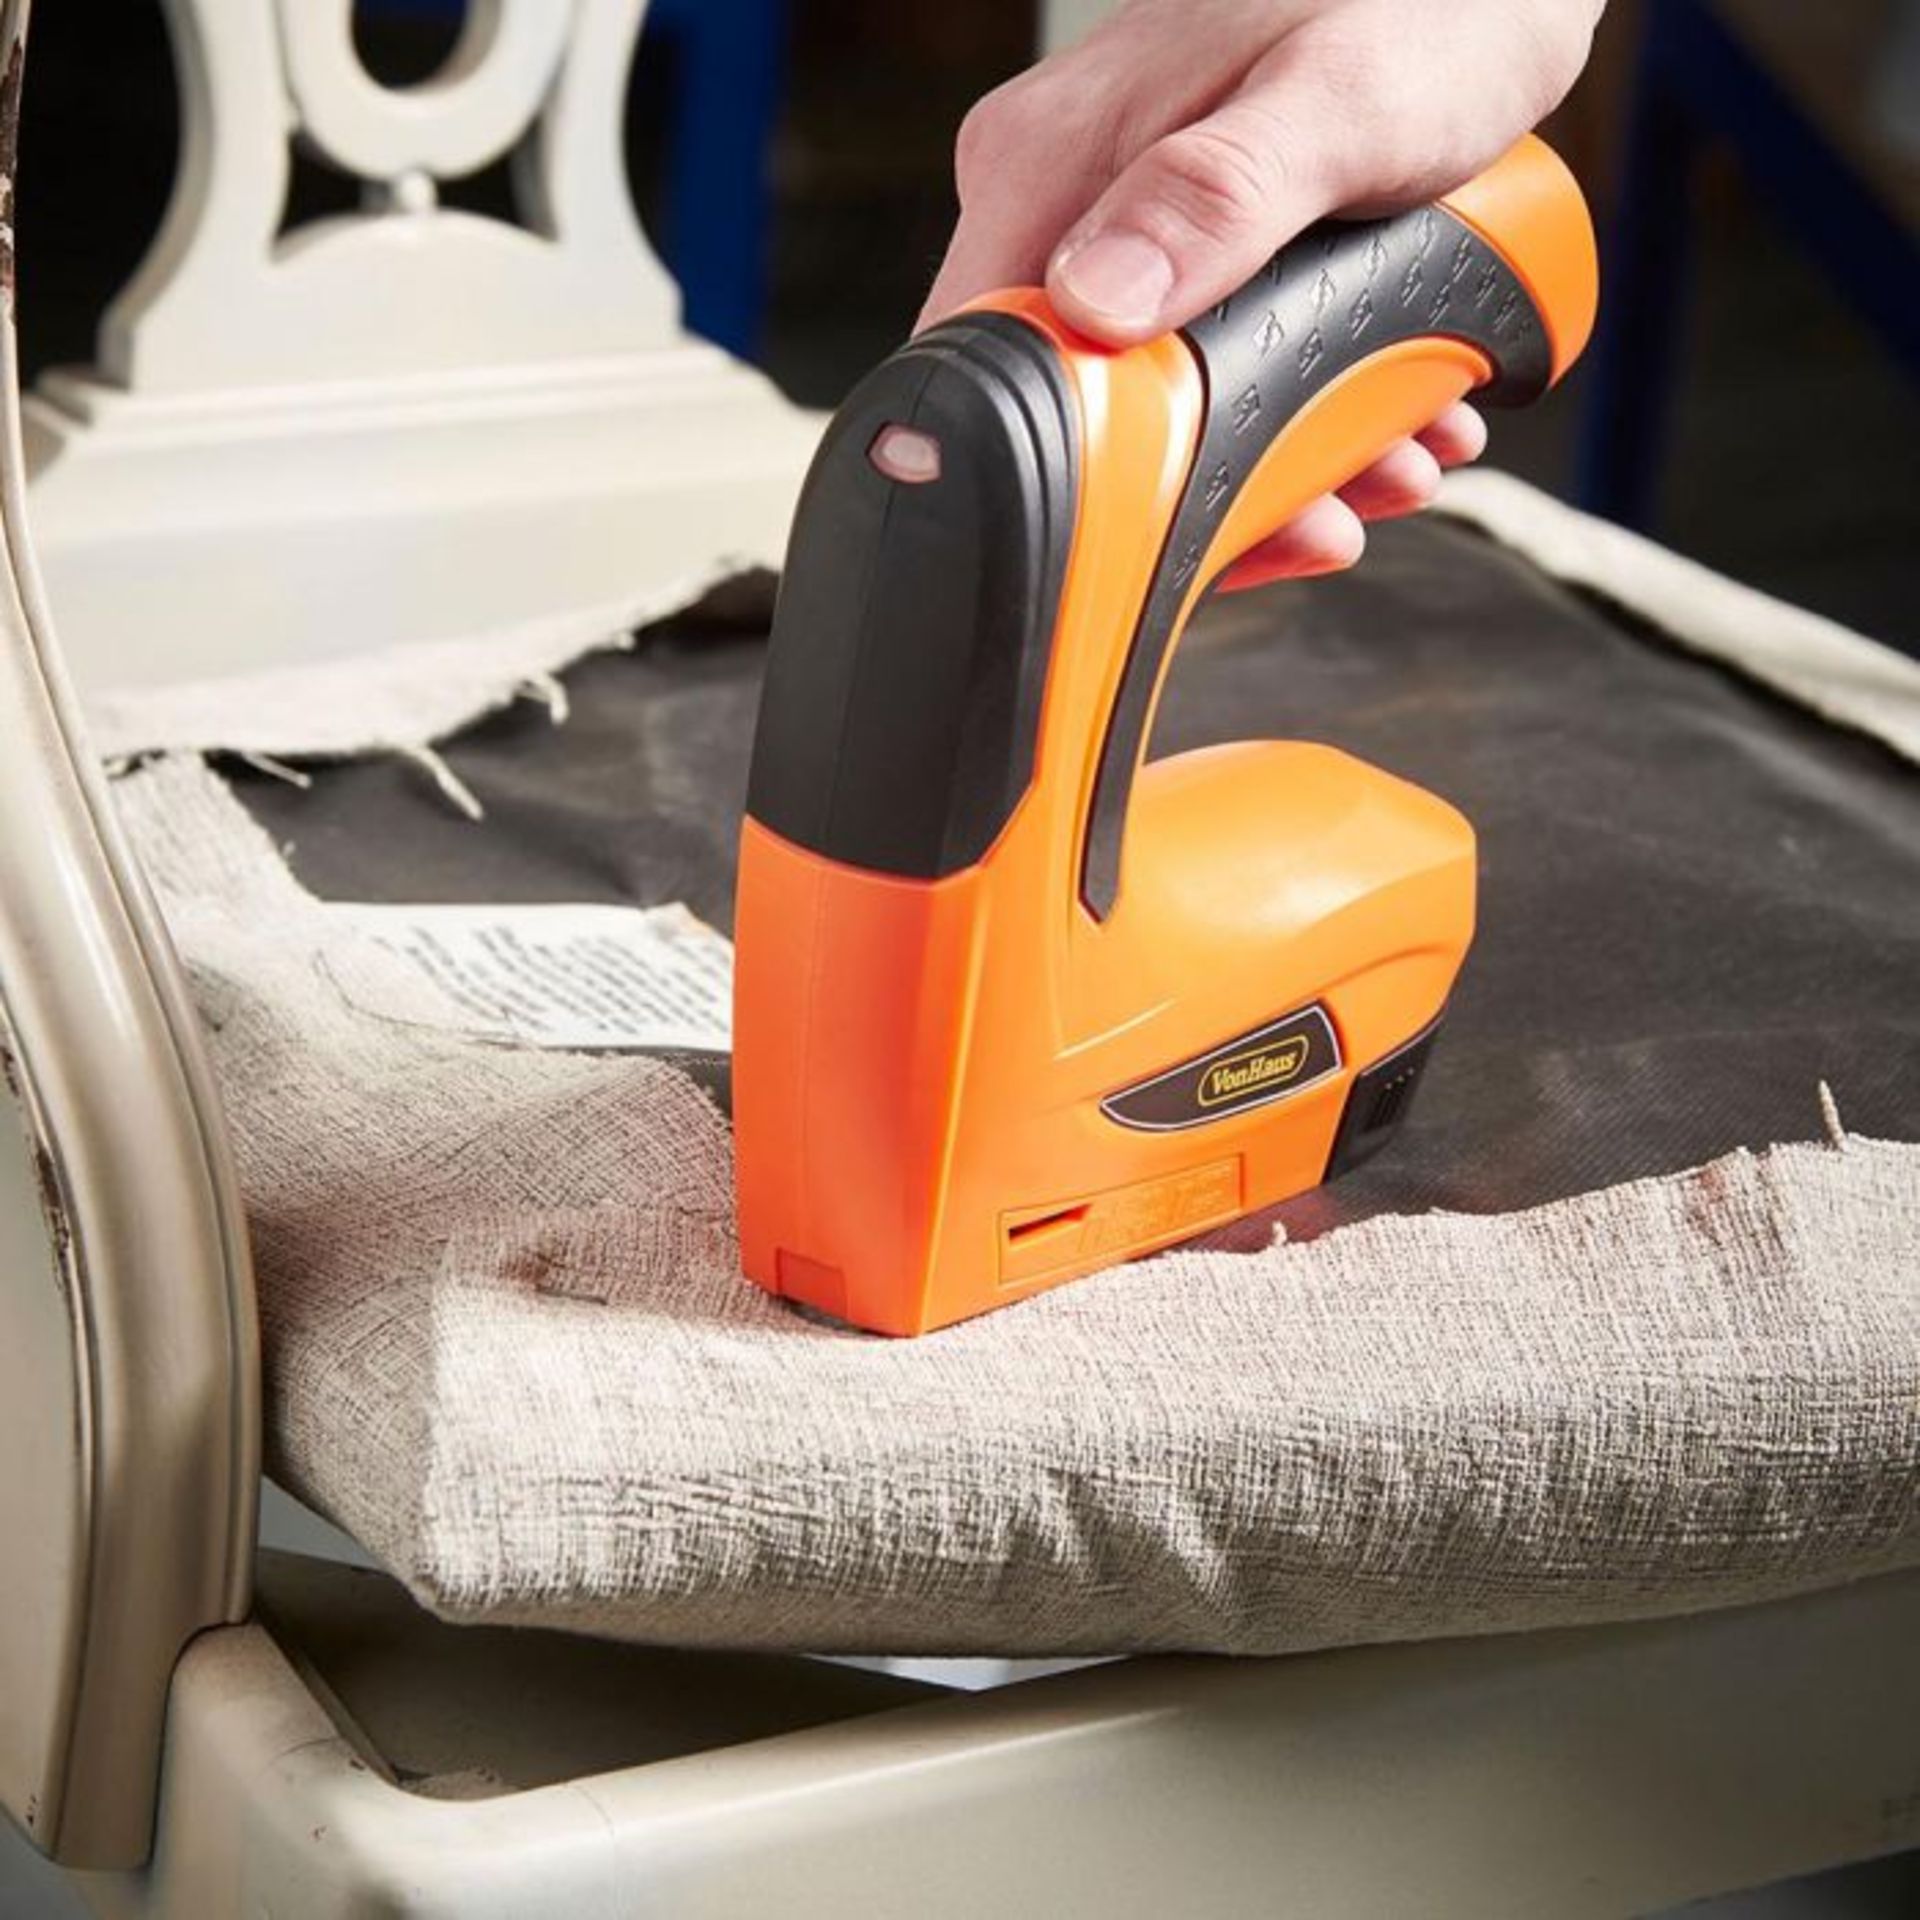 (V332) 3.6V Nailer & Stapler Ideal for crafting and decorating – quickly staple, nail or fas... - Image 3 of 4